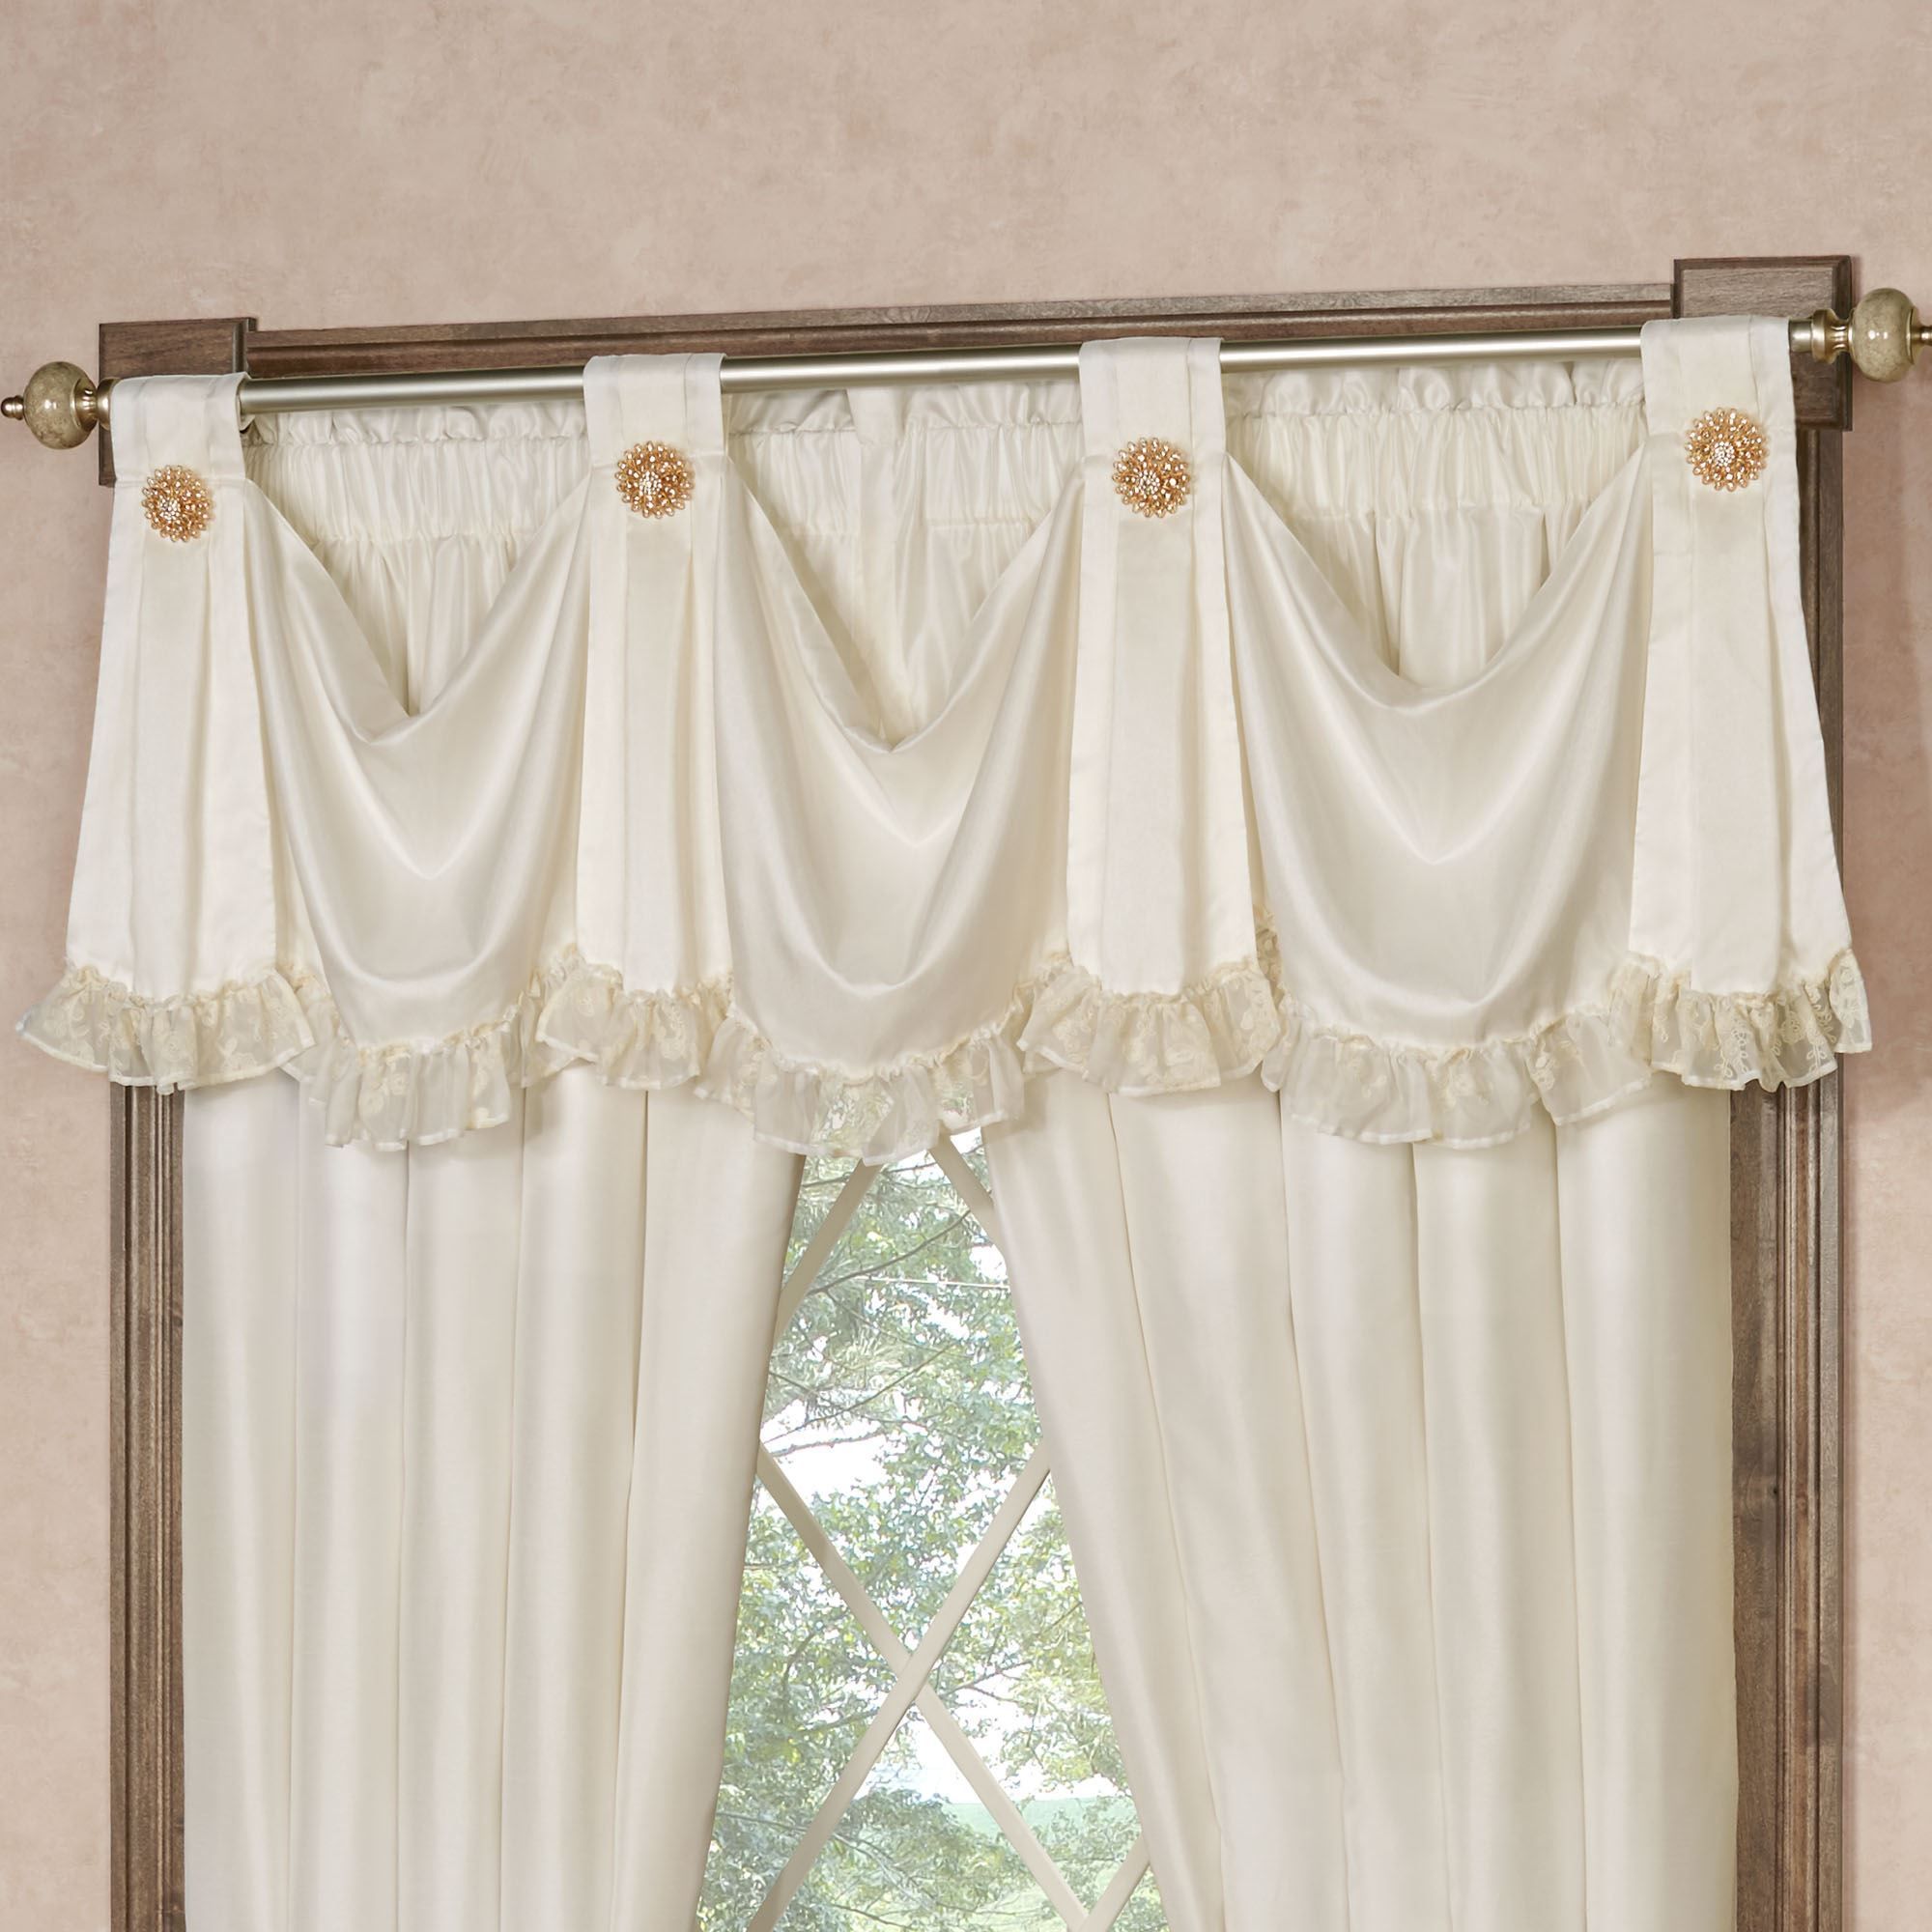 Cameo Lace Romantic Vintage Style Grande Bedspread Bedding Within Vertical Ruffled Waterfall Valances And Curtain Tiers (View 16 of 20)